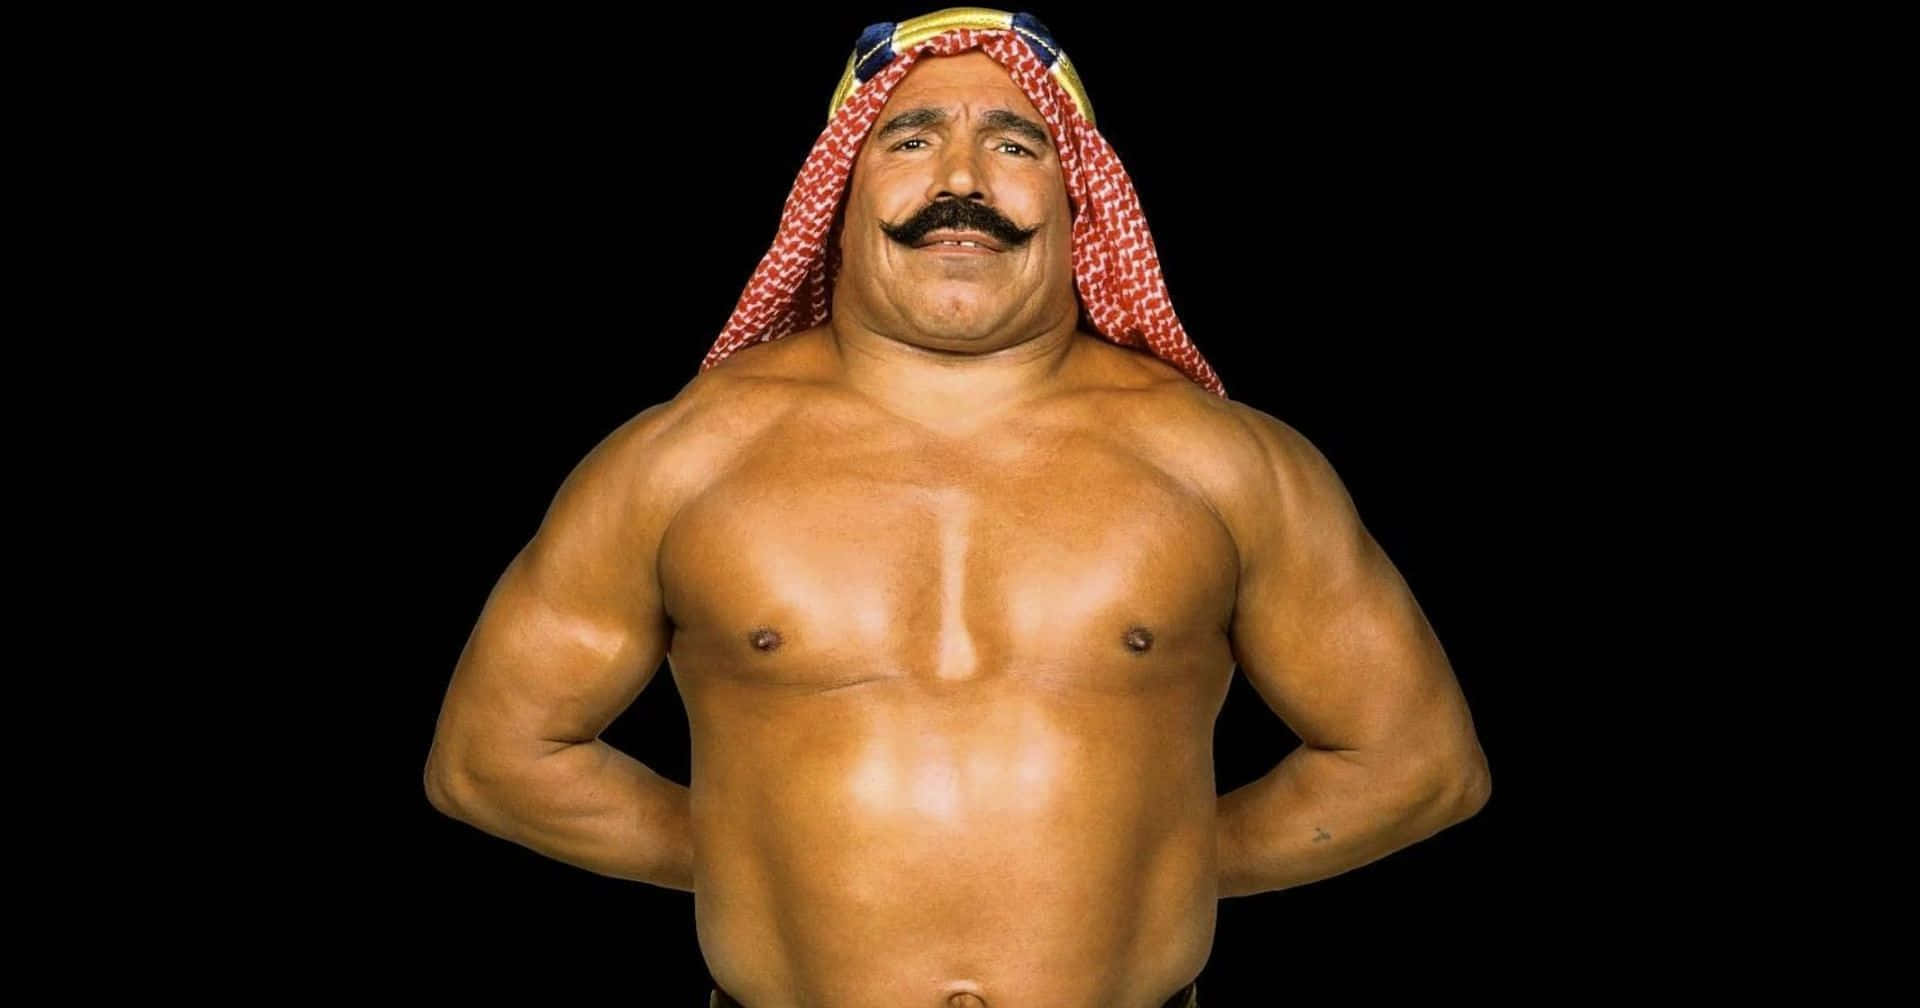 The Iron Sheik Hands On Back Wallpaper